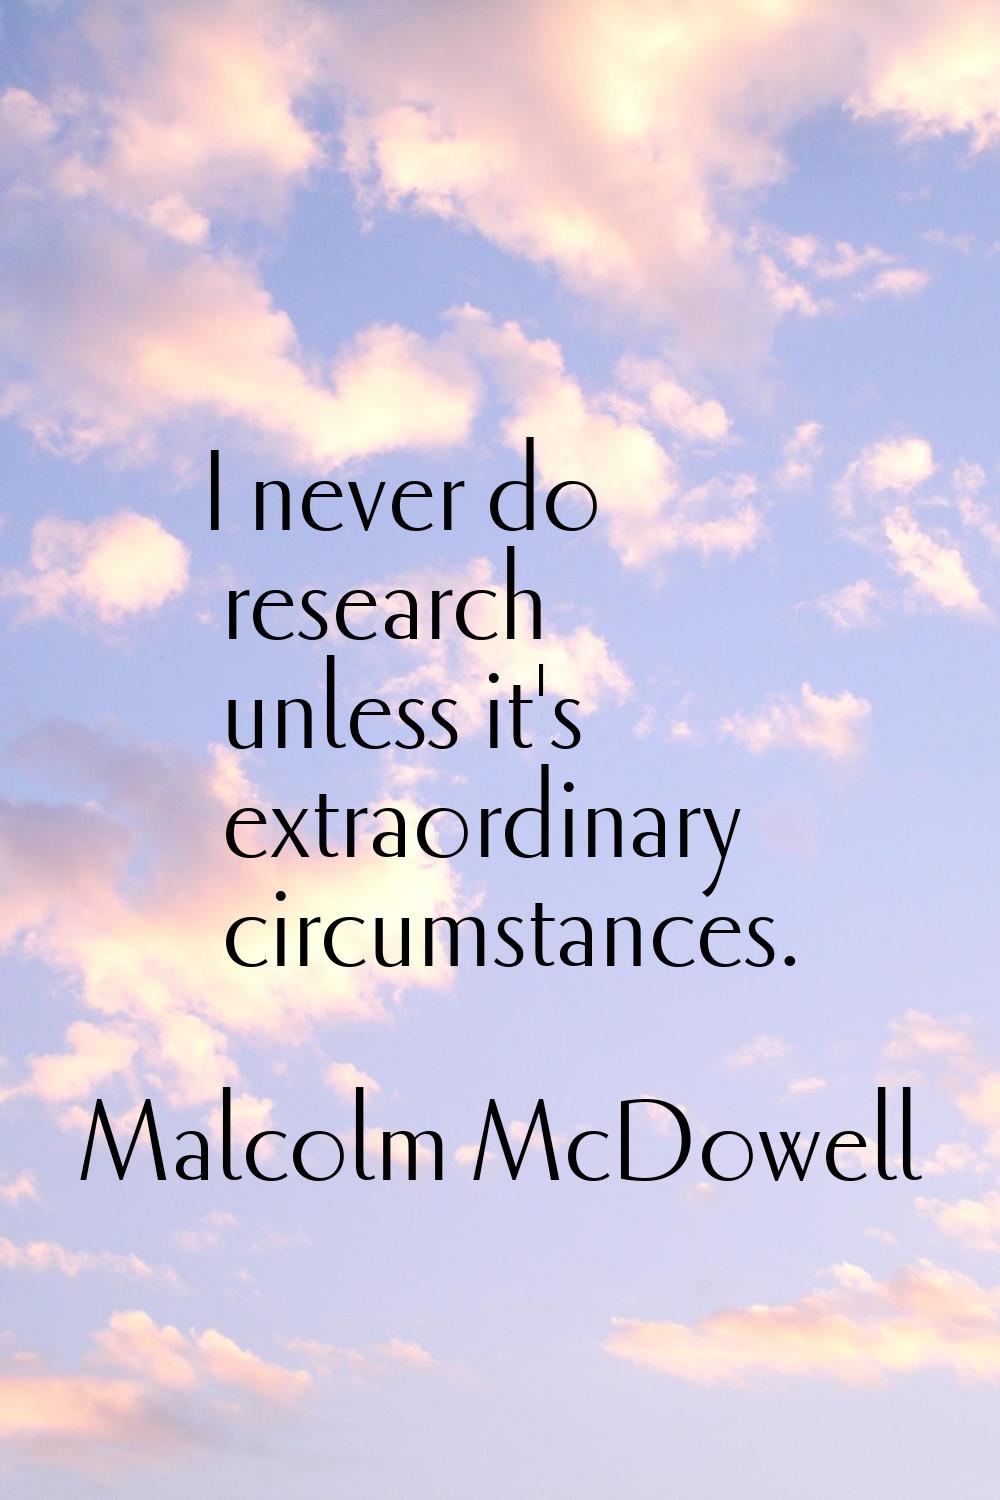 I never do research unless it's extraordinary circumstances.